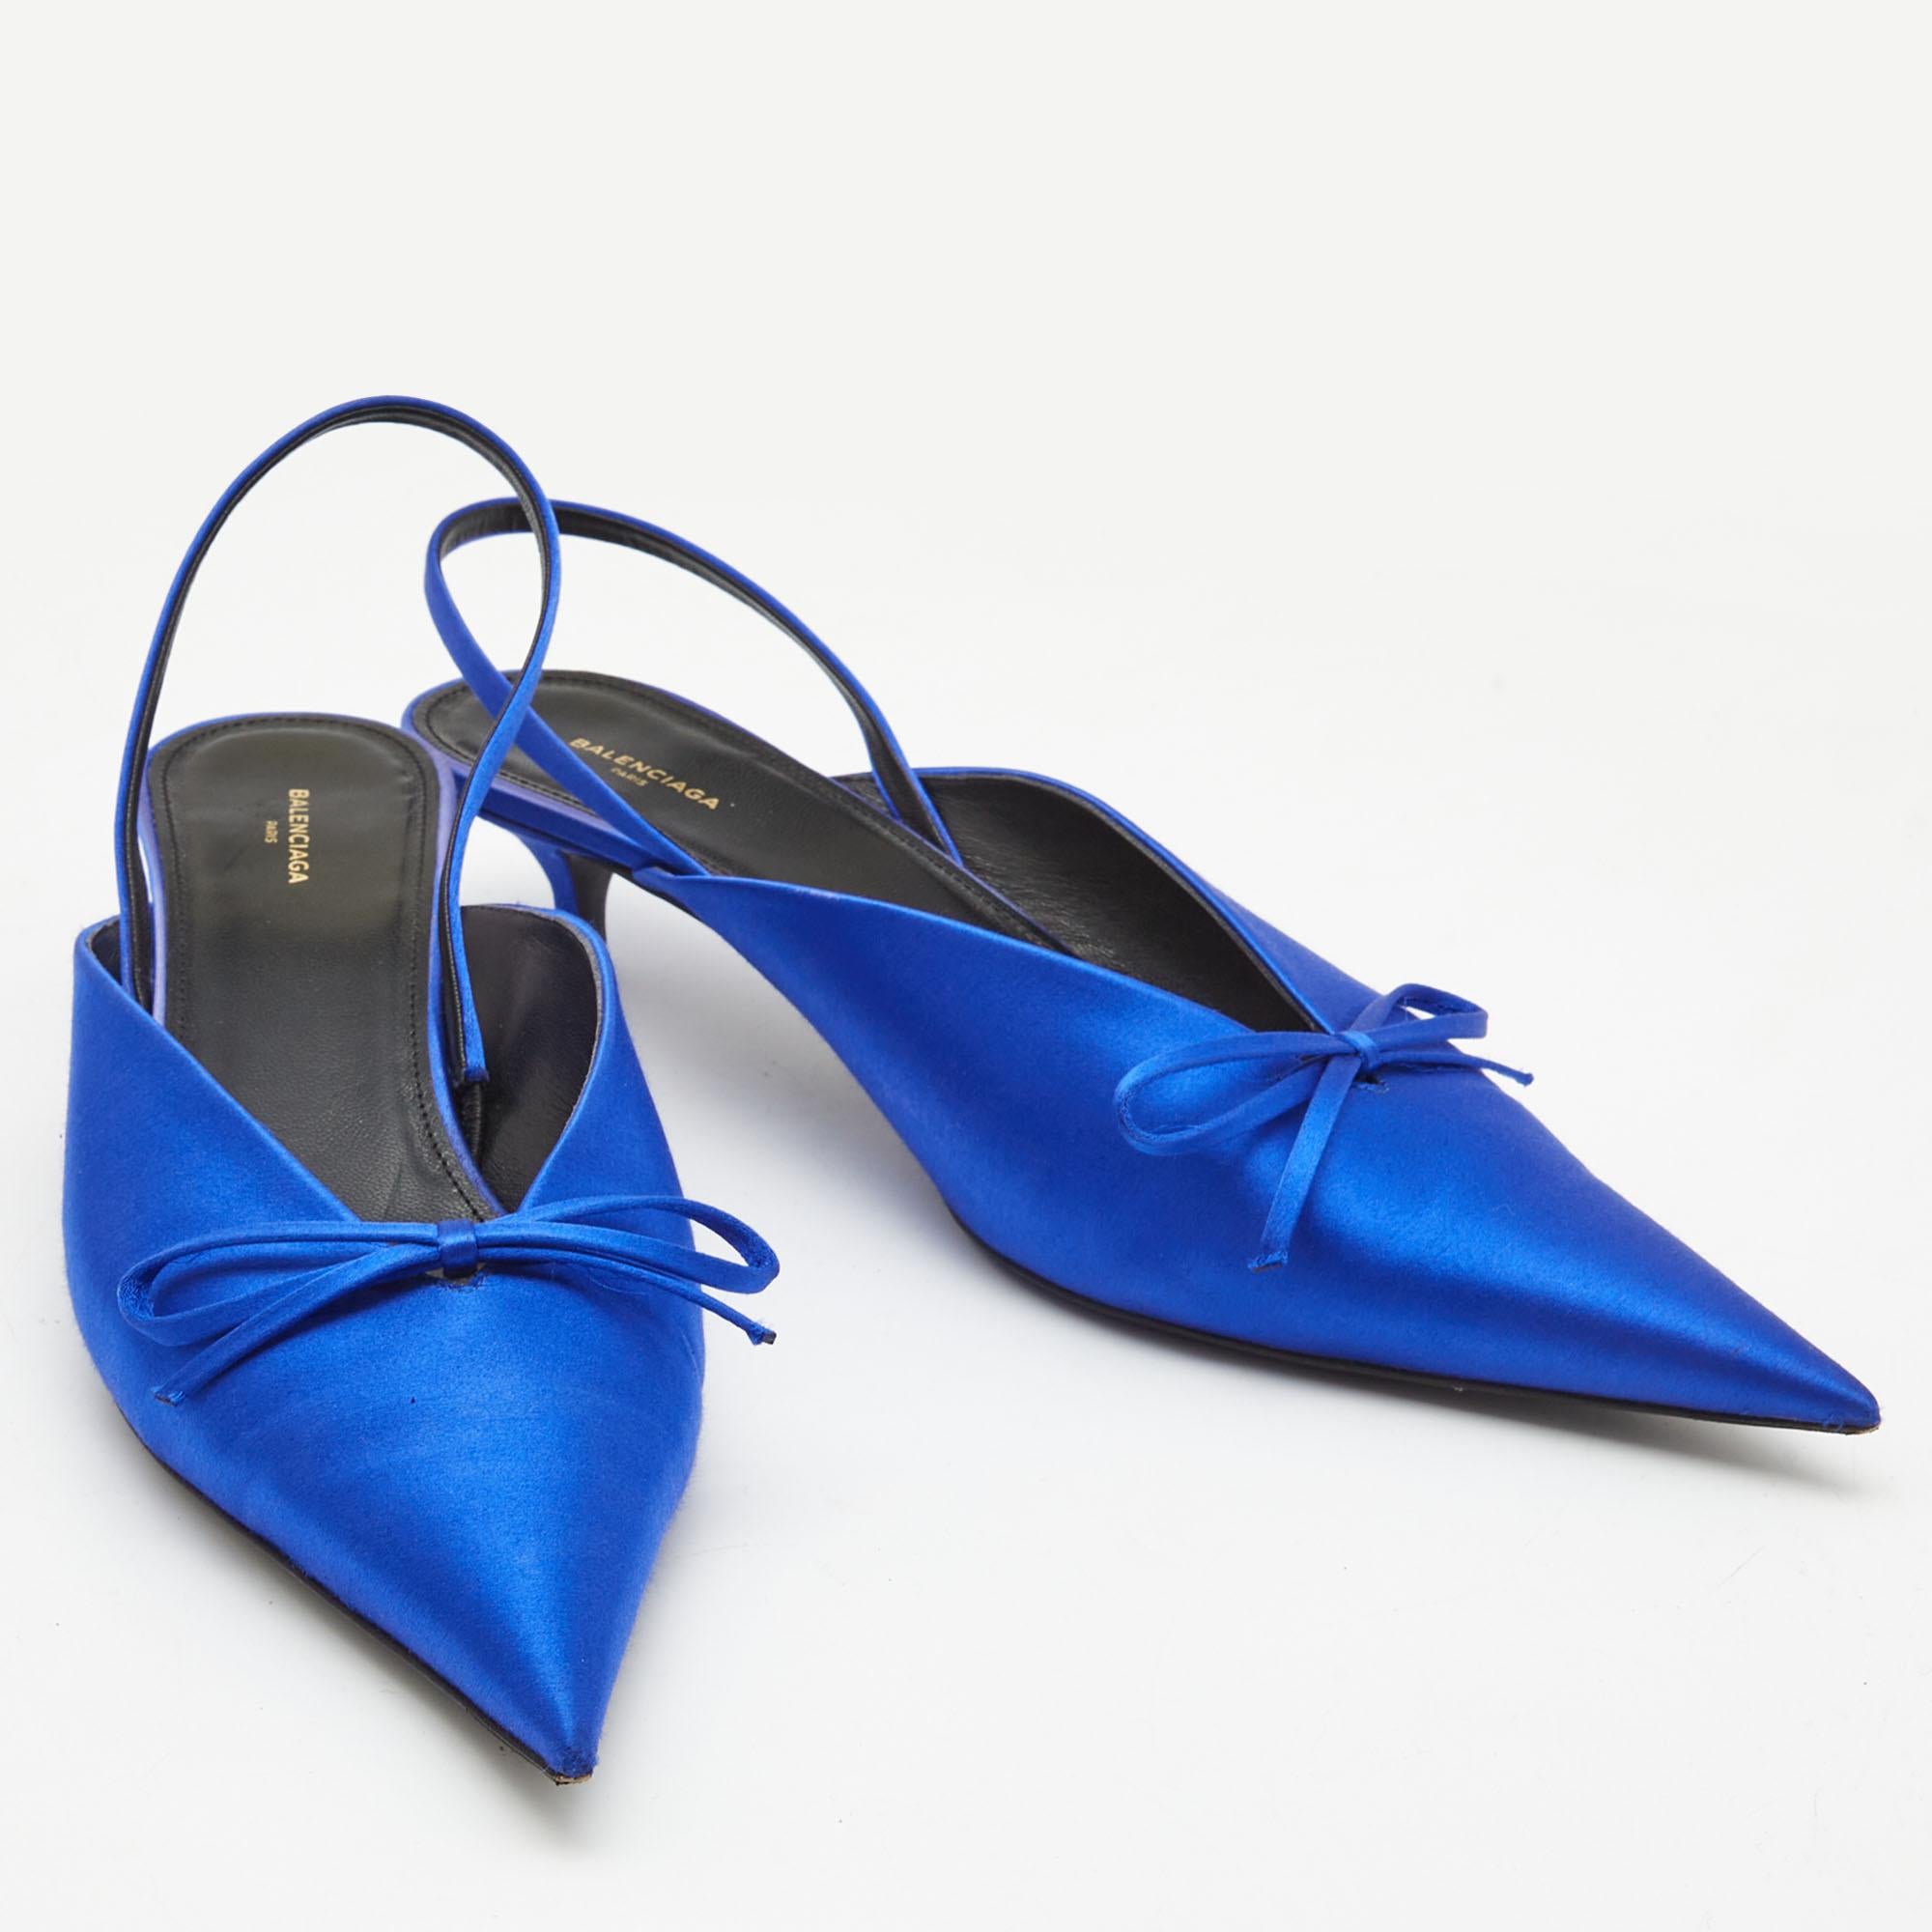 Sleek and sharp, this pair of Balenciaga pumps will complement a variety of outfits in your wardrobe. The satin creation features a blue hue and leather insoles. Elevated on 4.5cm heels, it will take your fashion statement a notch higher.

